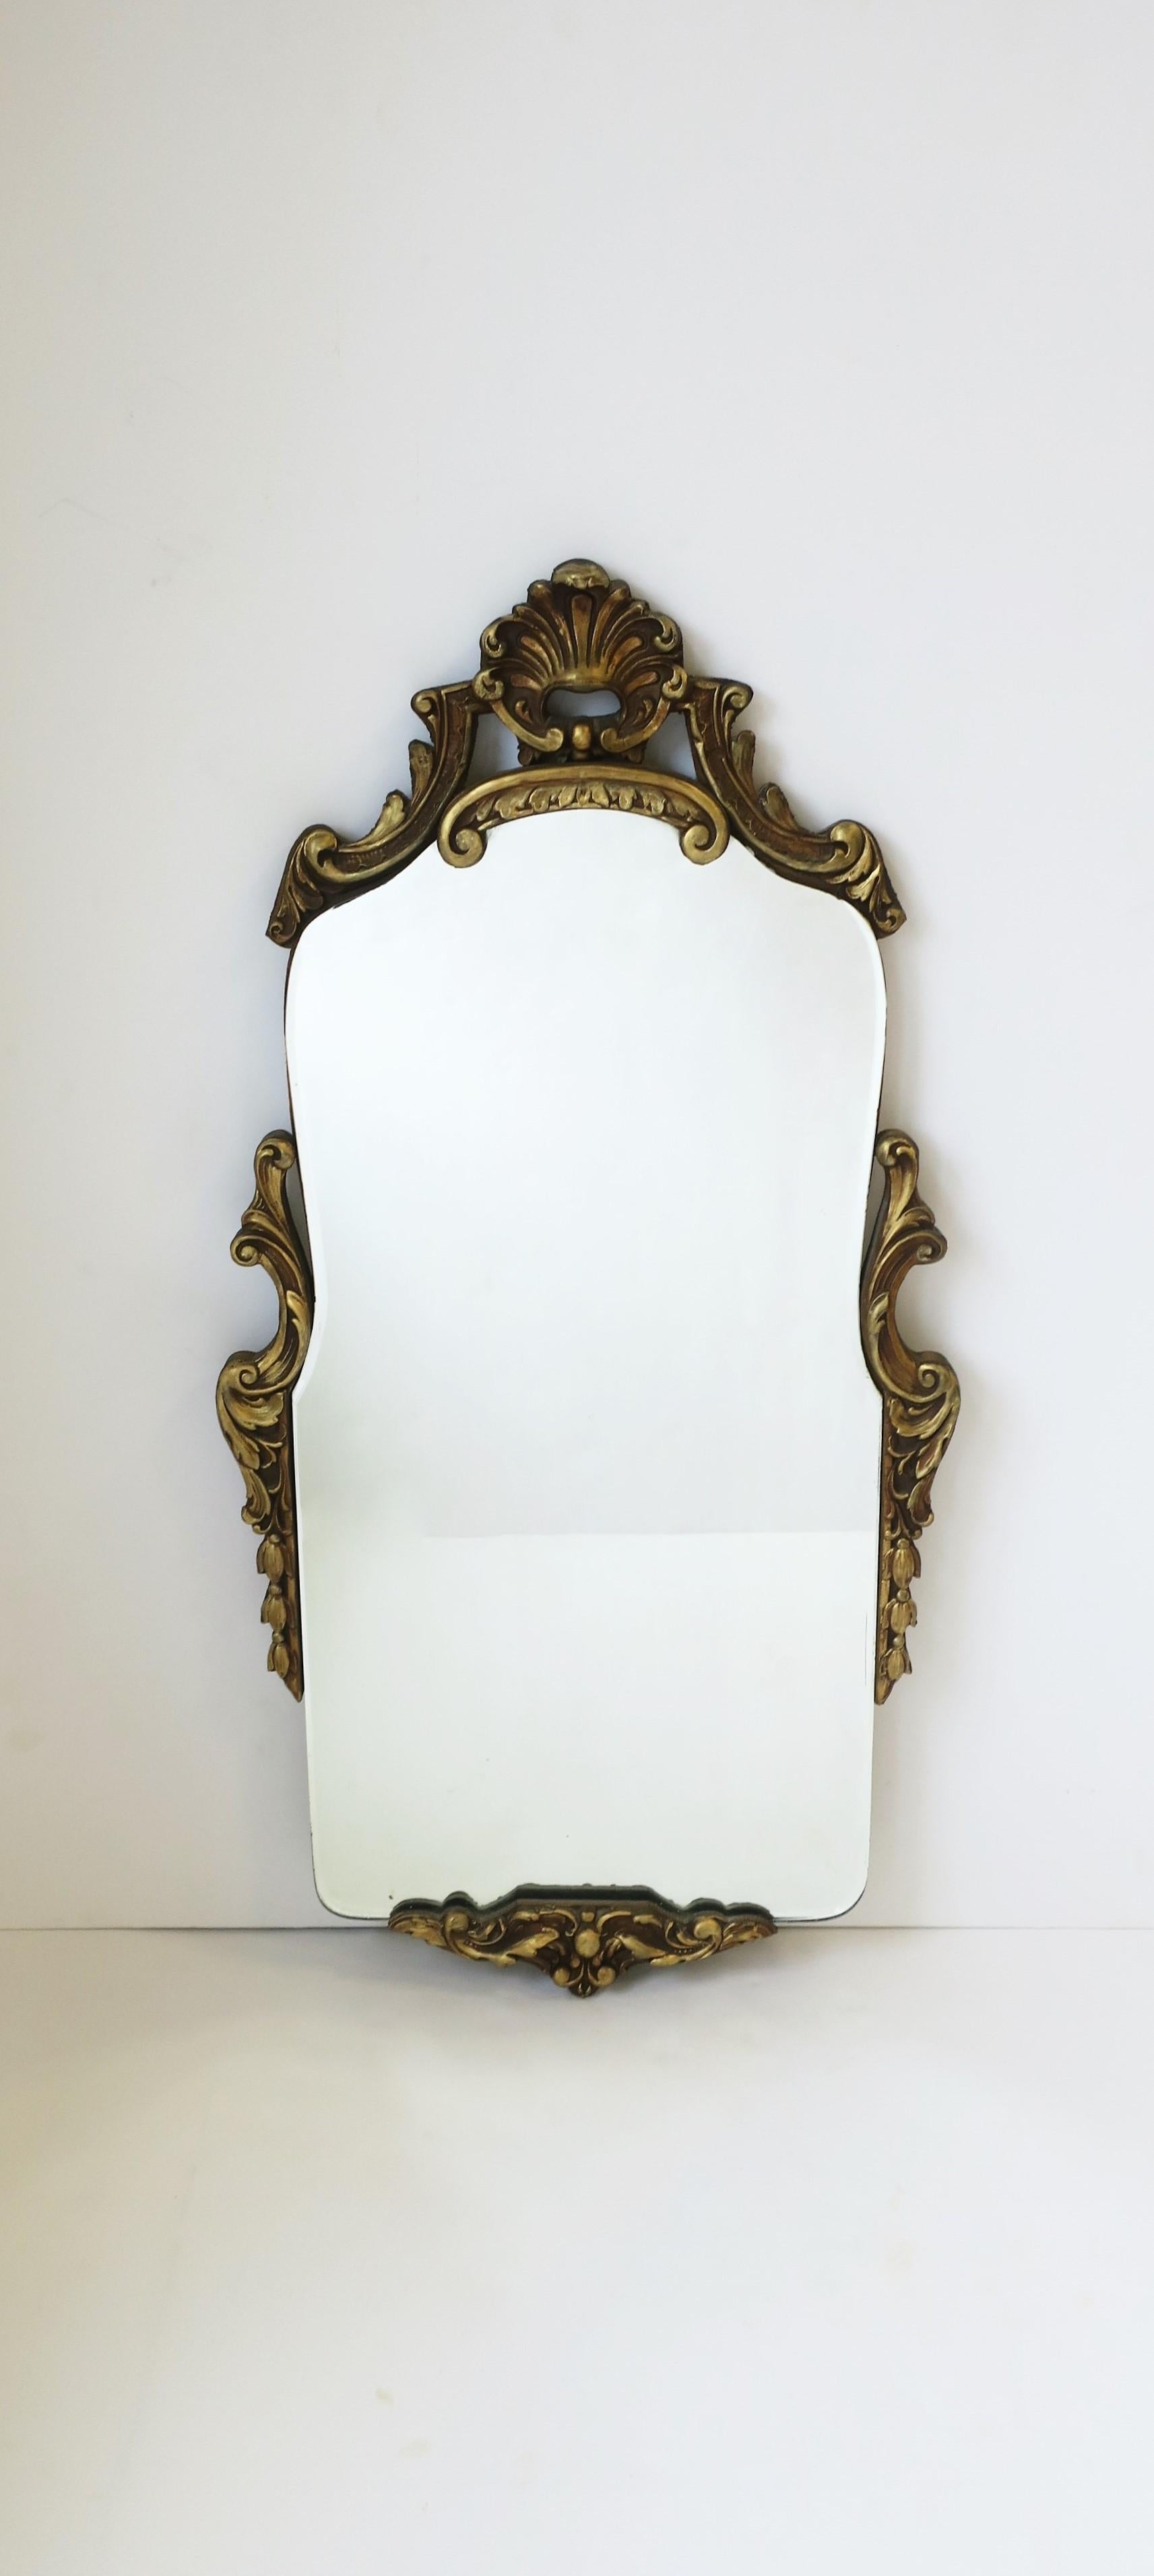 A great slender Italian gold giltwood wall mirror, circa mid-20th century, Italy. A great piece for a vanity bathroom, hallway foyer entryway, etc., where you may need a smaller/slender mirror. Dimensions: 1.38